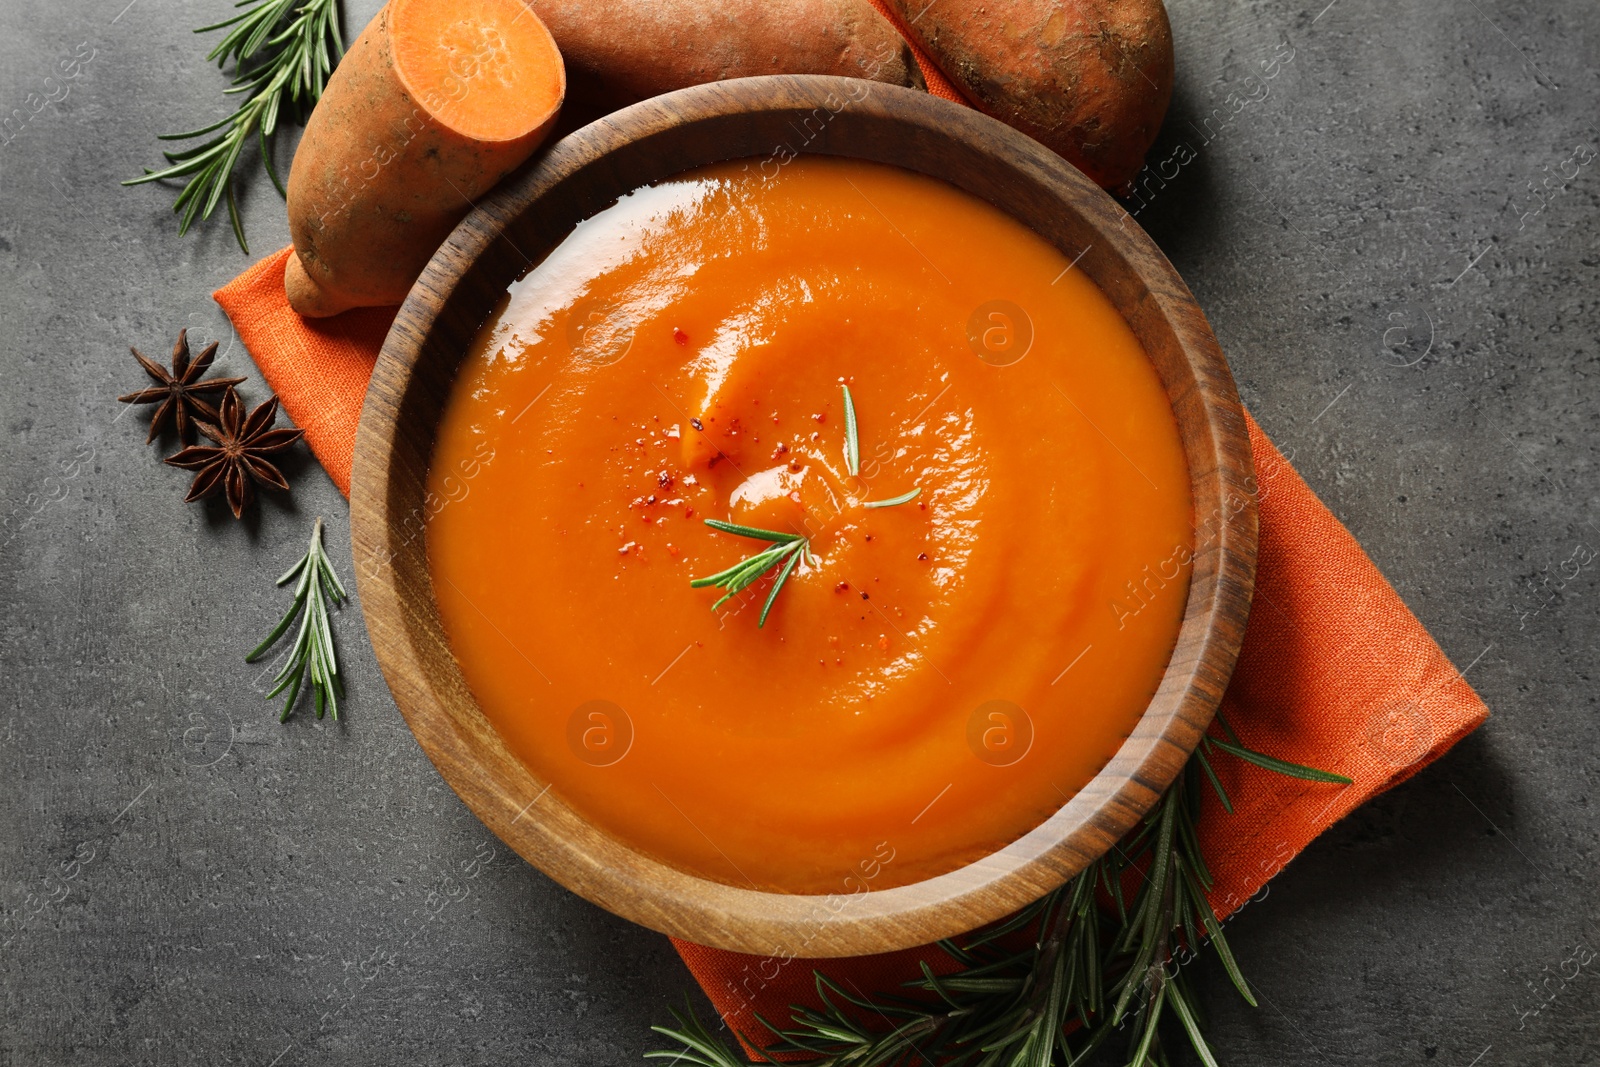 Photo of Flat lay composition with bowl of tasty sweet potato soup on grey background